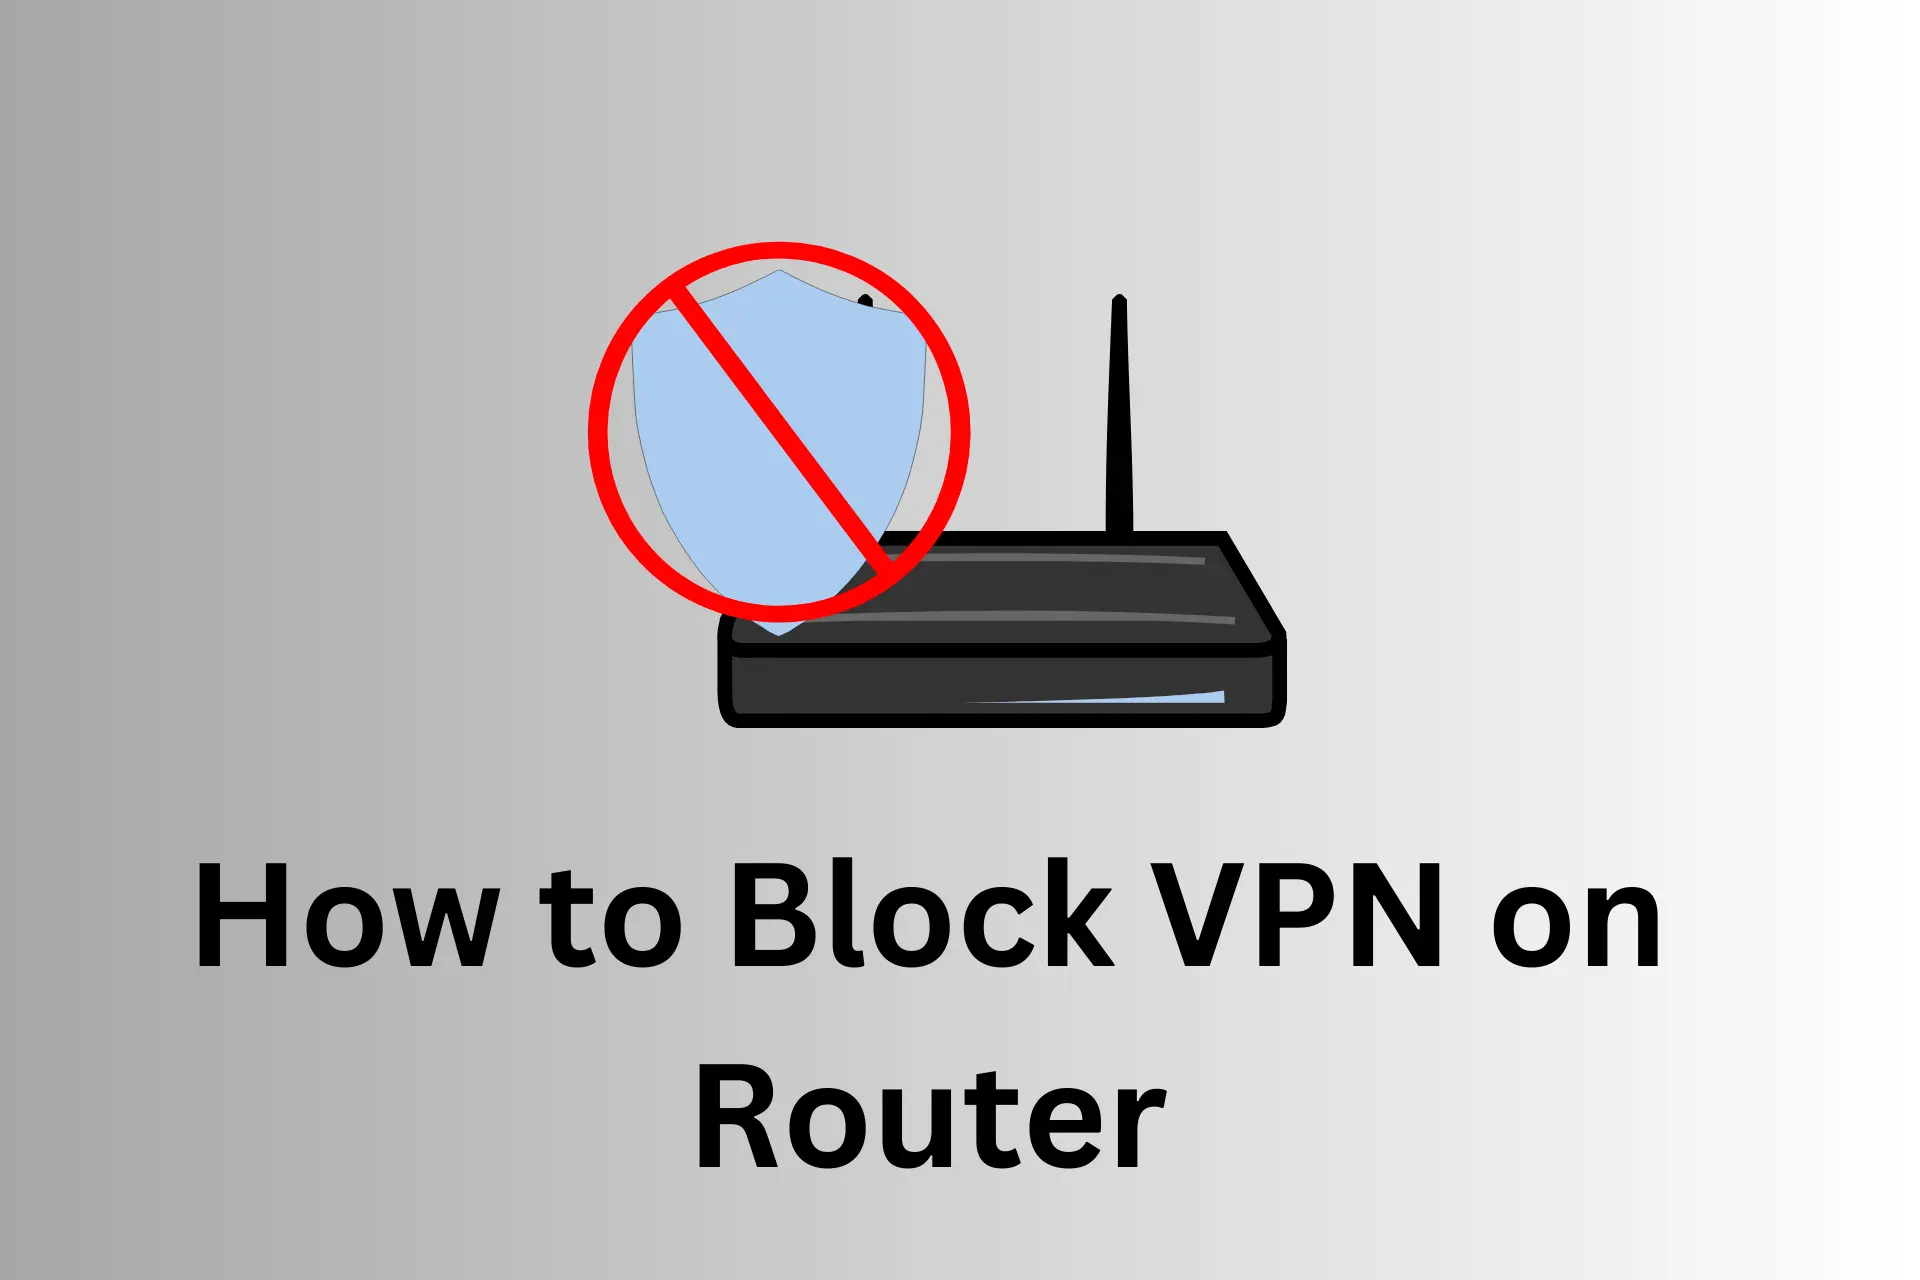 How to Block VPN on Router